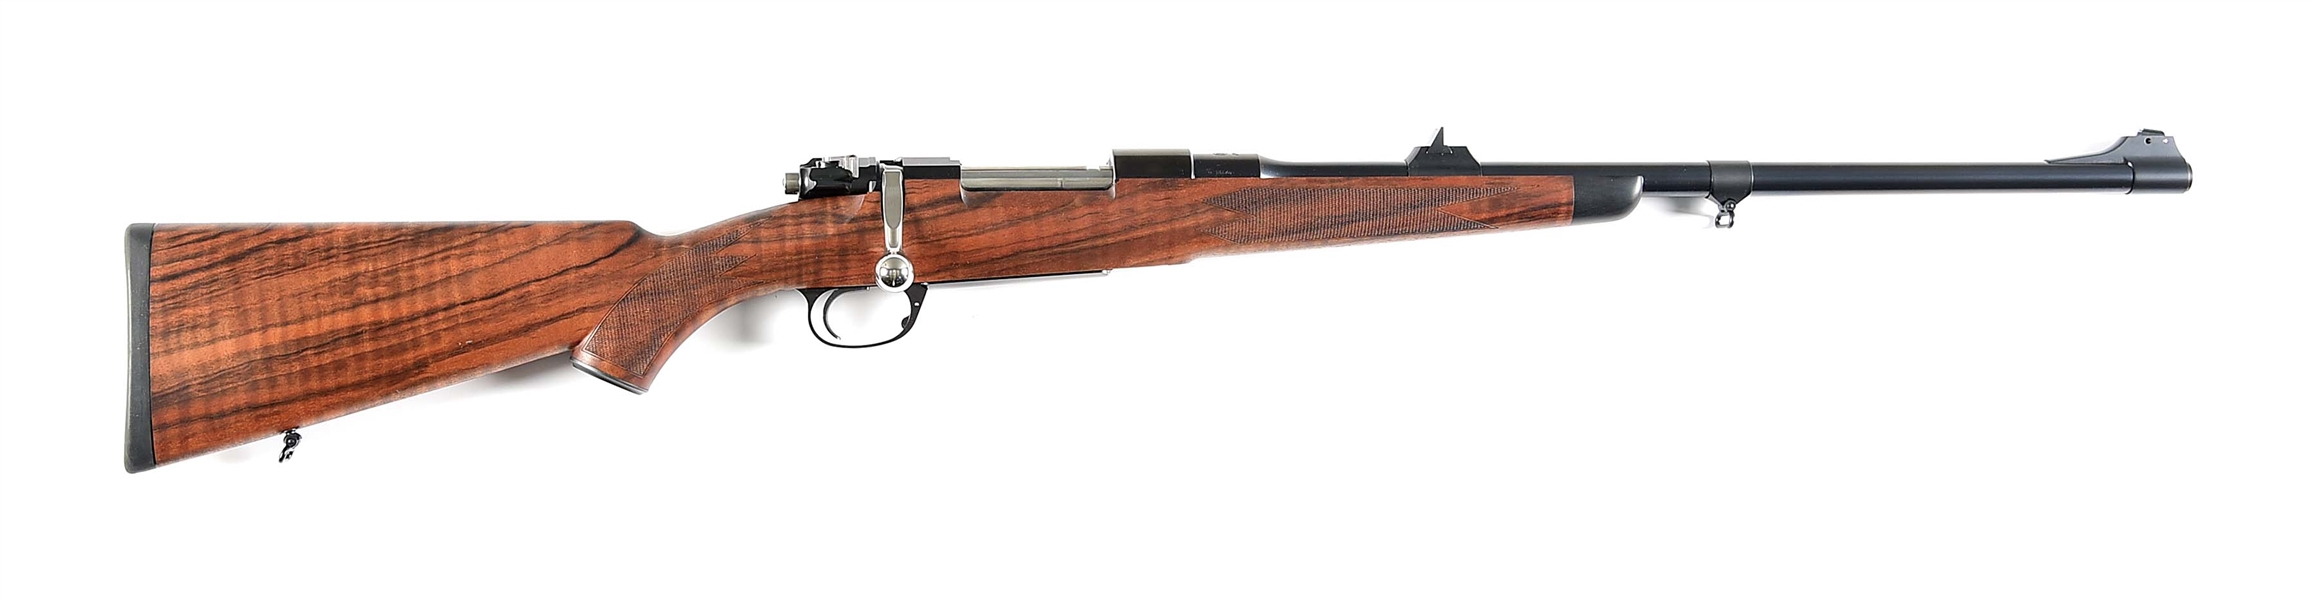 (M) MAUSER M98 STANDARD BOLT ACTION RIFLE IN 8X57MM IS.